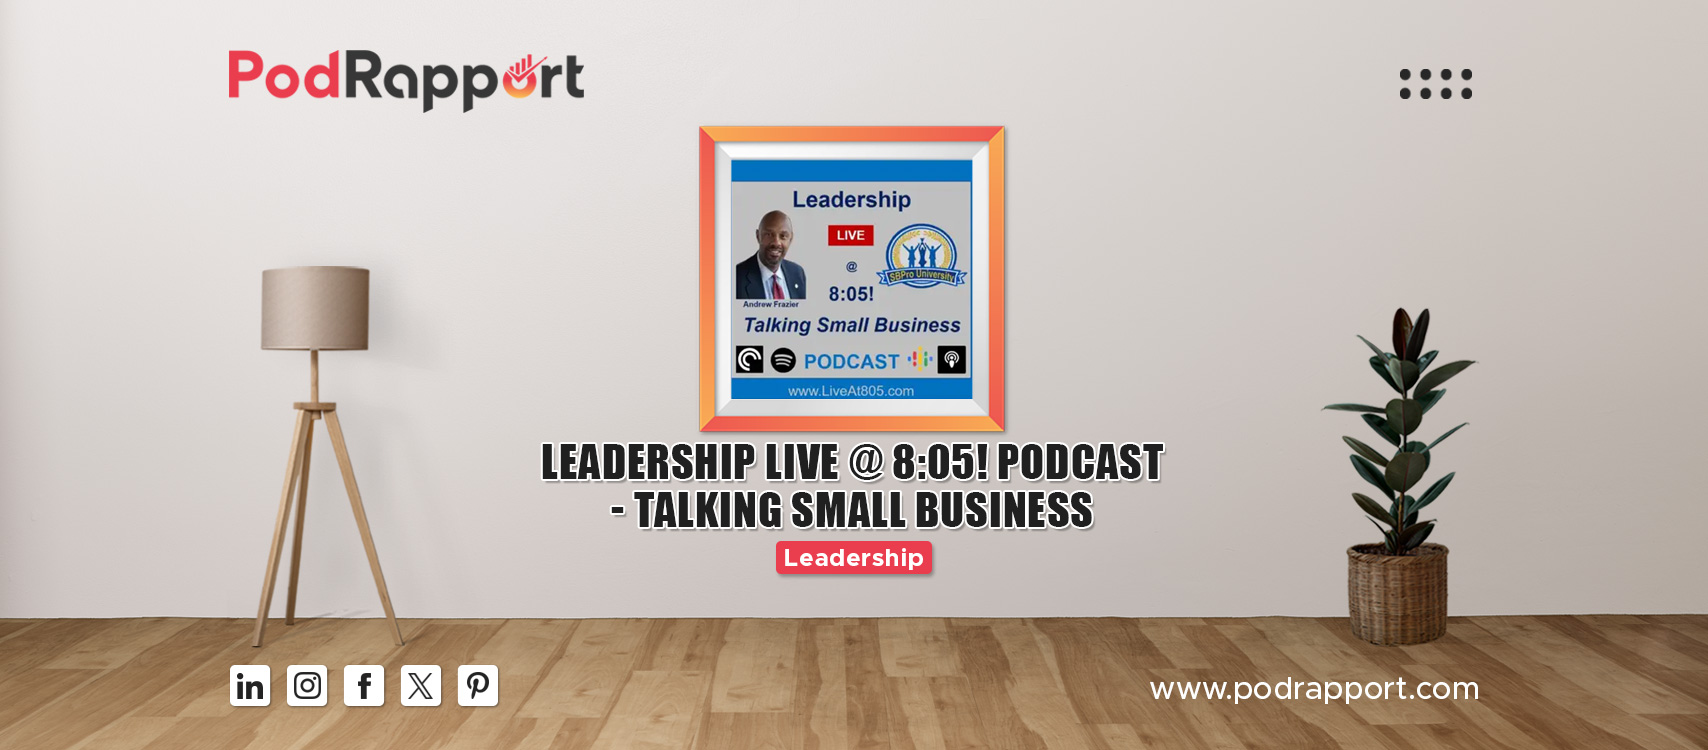 Leadership LIVE @ 8:05! Podcast - Talking Small Business